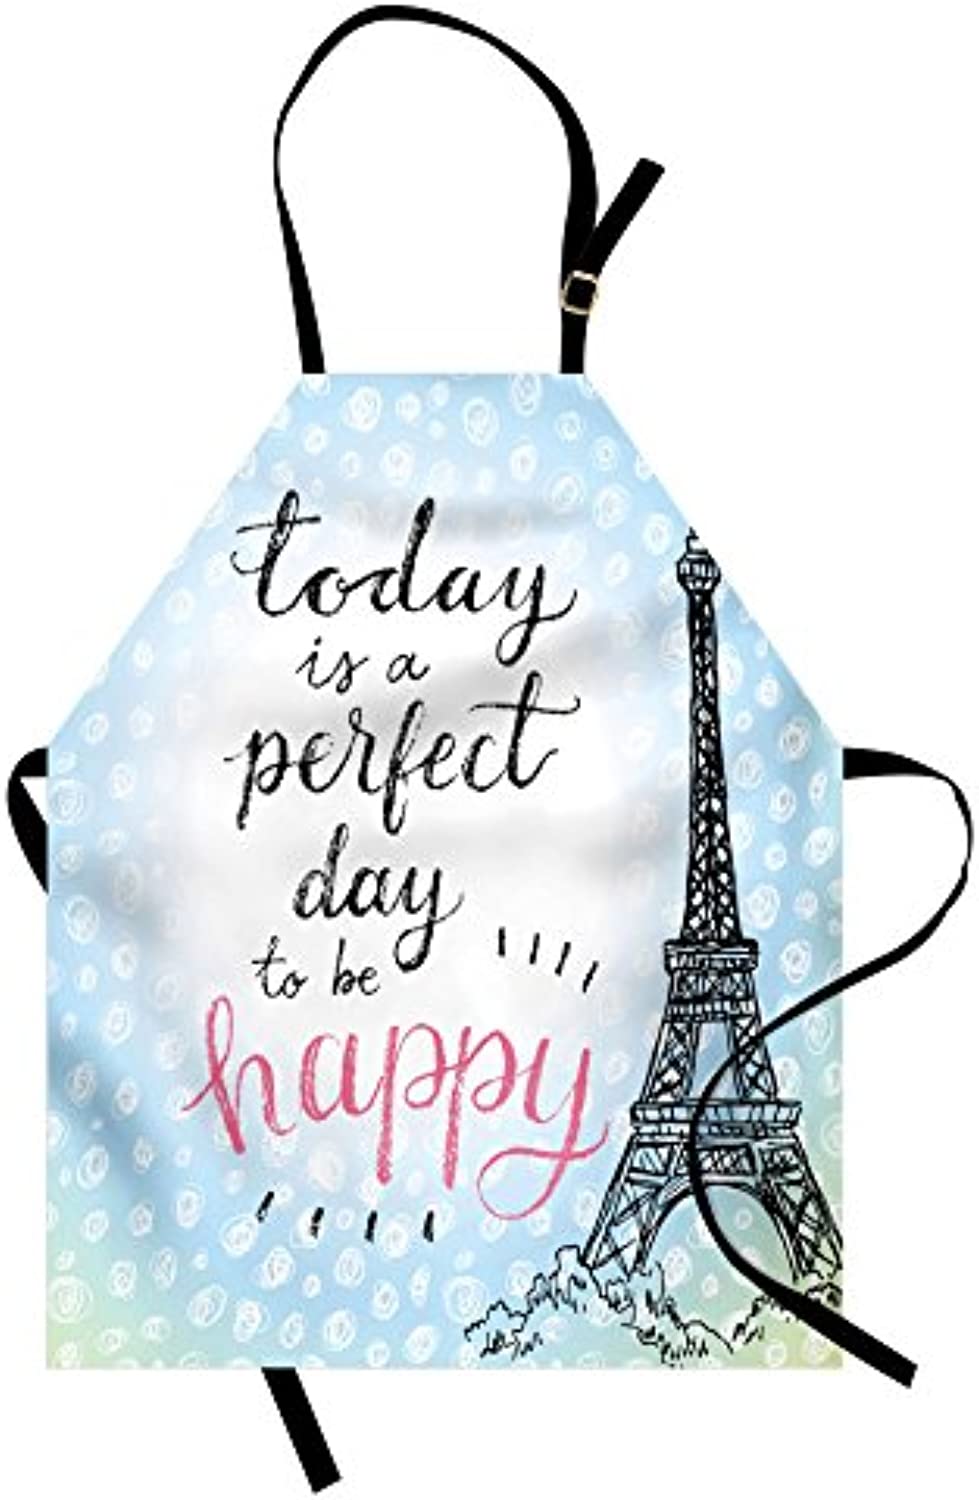 Granbey Eiffel Tower Apron  Perfect Day Eiffel Tower Polka Dot Handwriting Typography Sketch Paris Print  Unisex Kitchen Bib with Adjustable Neck for Cooking Gardening  Adult Size  Black Blue